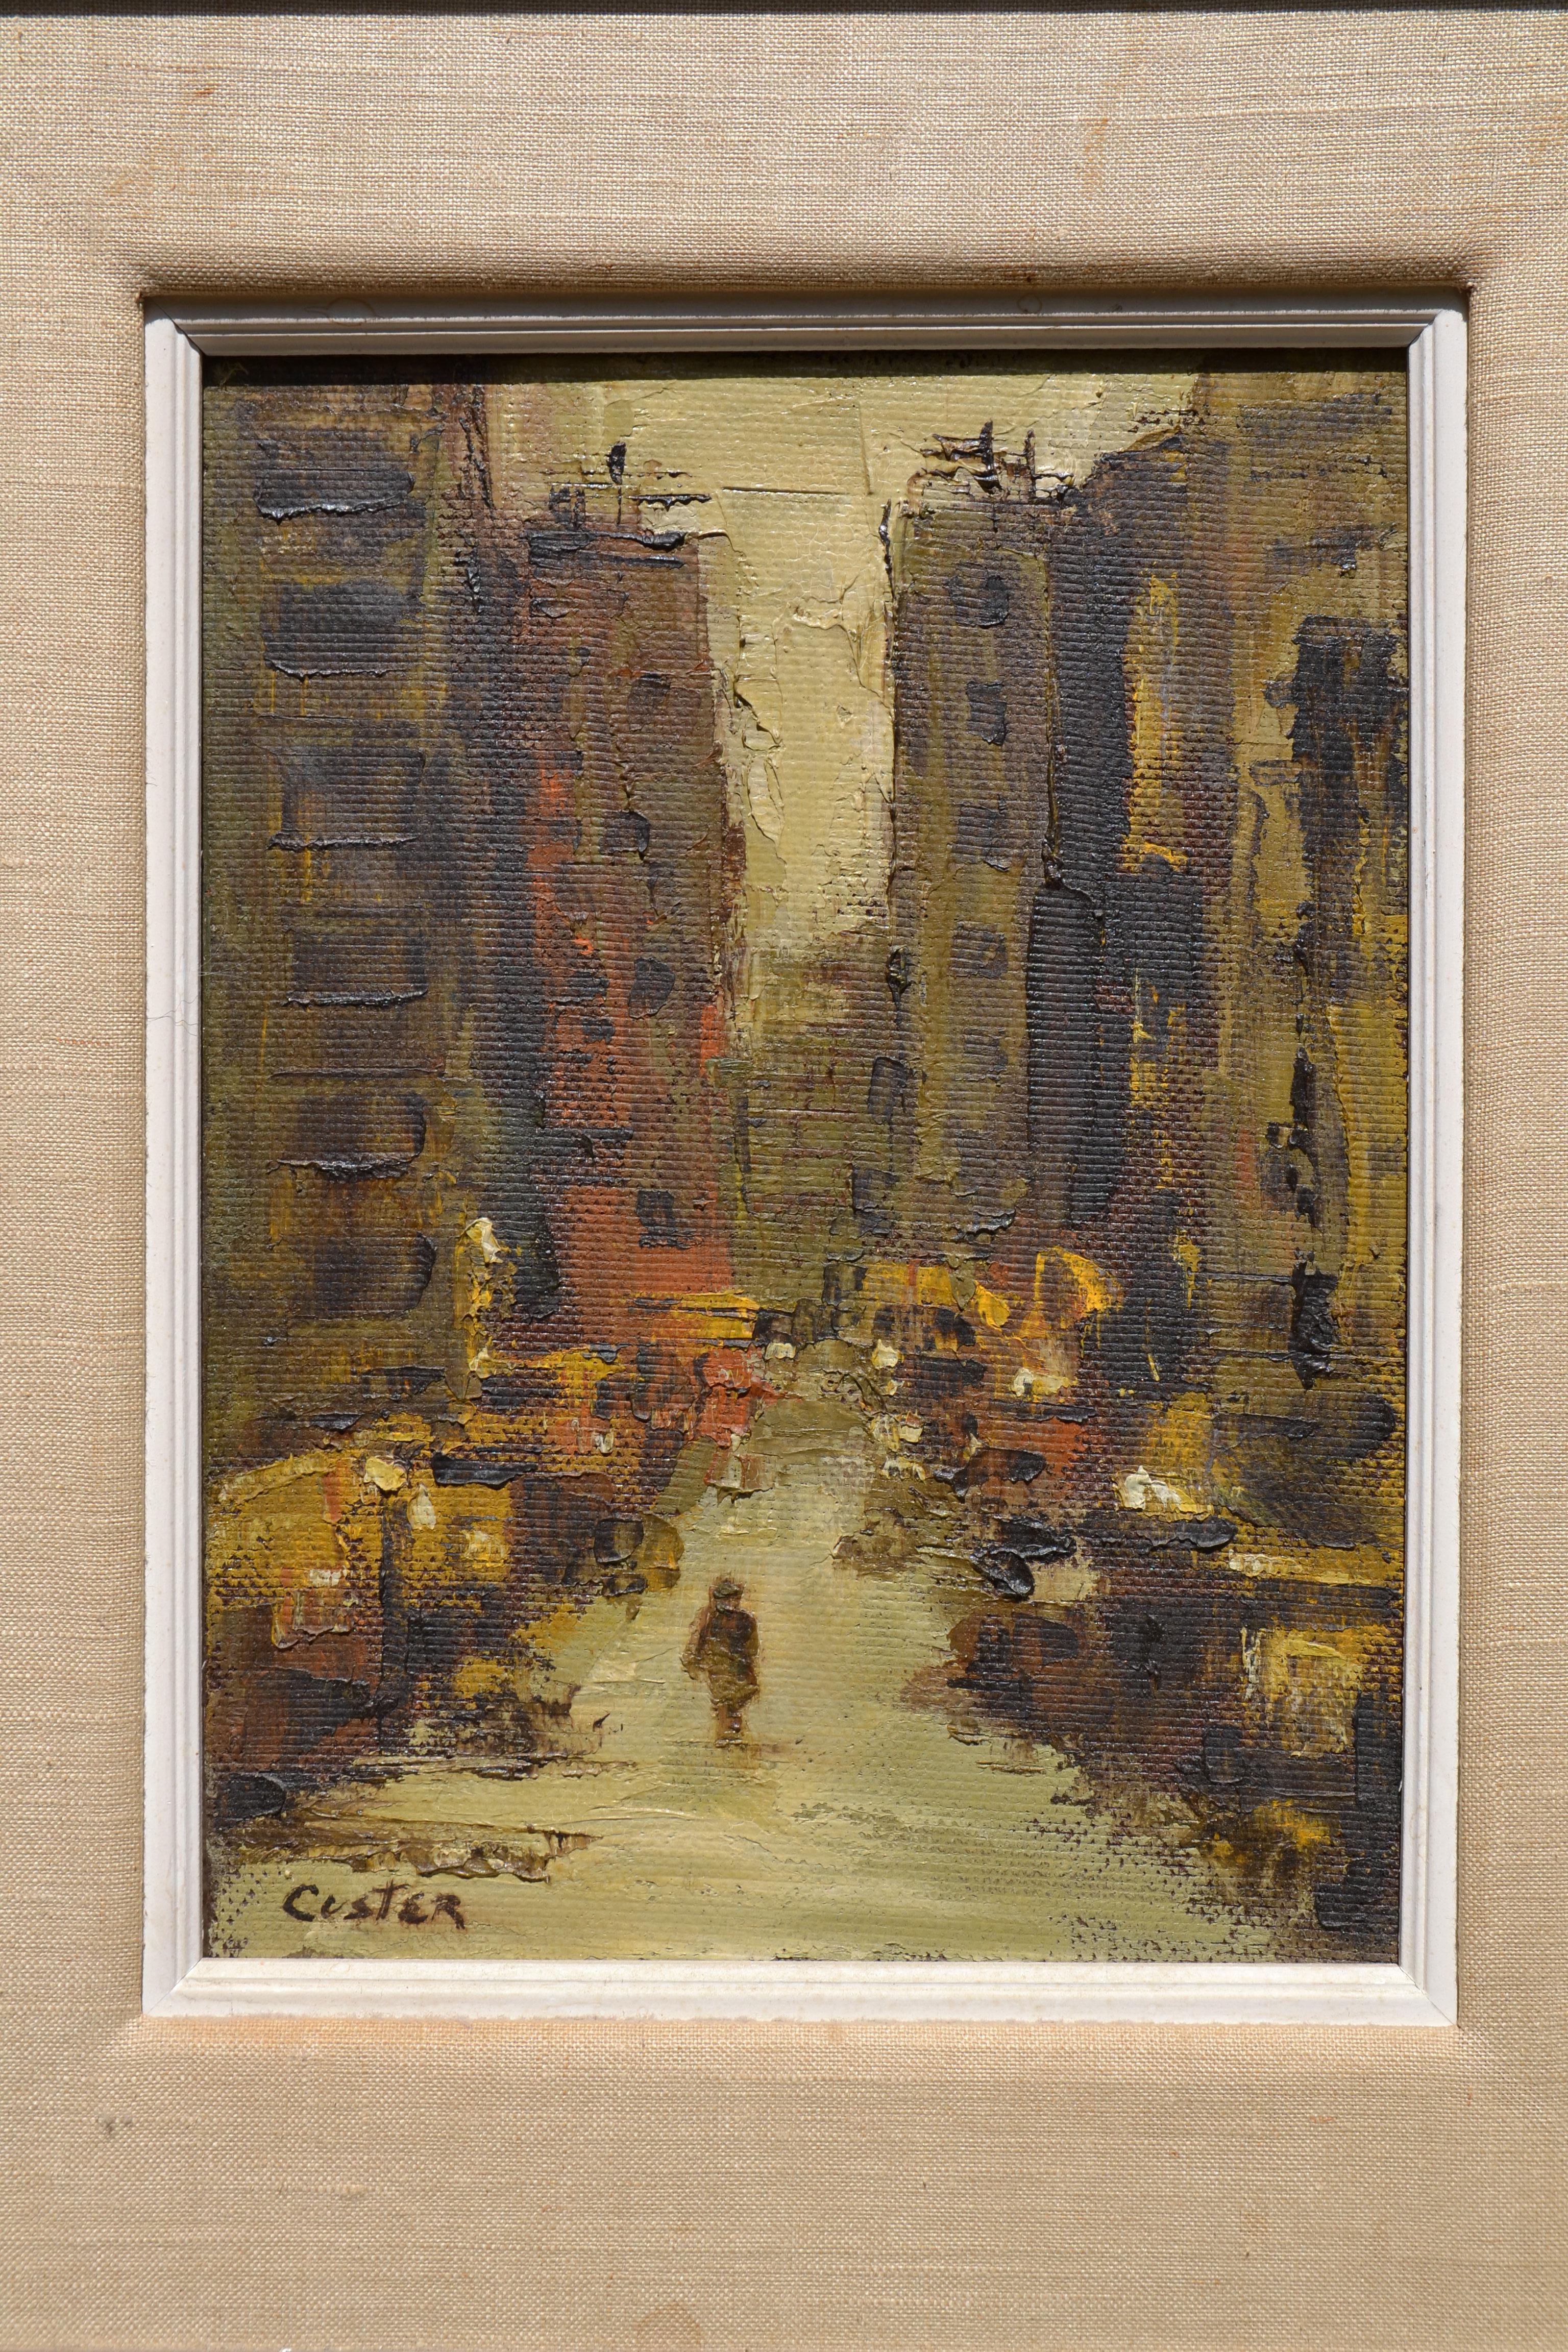 City street perspective painting by the artist Custer.
An impressionistic painting that was done with oil on canvas. 
Signed in the bottom corner.